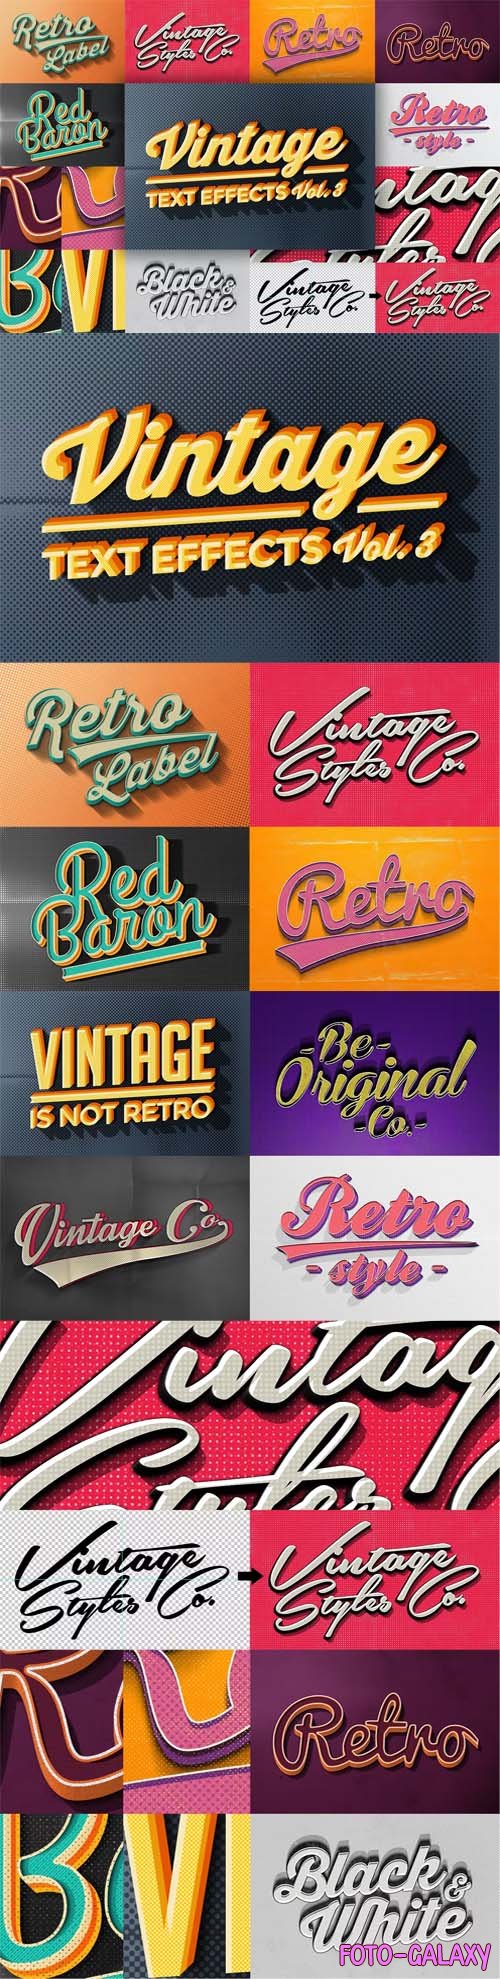 Vintage Photoshop Text Effects Pack Vol.3